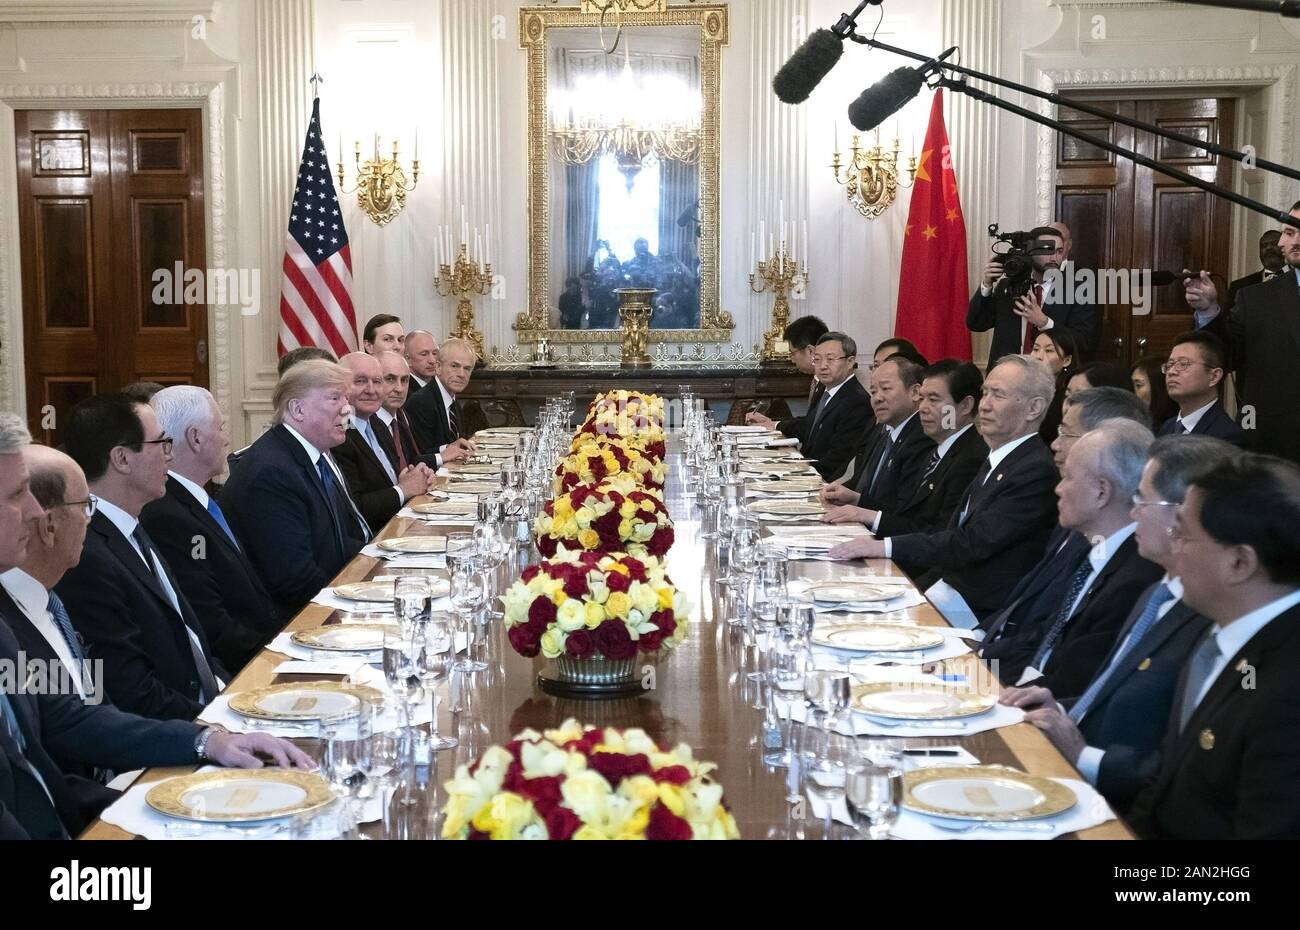 Washington, United States. 15th Jan, 2020. President Donald Trump, joined by members of his administration, has lunch with the Vice Premier of China Liu He and his delegation after the two signed Phase 1 of the U.S. China Trade Deal, at the White House in Washington, DC on Wednesday, January 15, 2020. Photo by Kevin Dietsch/UPI Credit: UPI/Alamy Live News Stock Photo